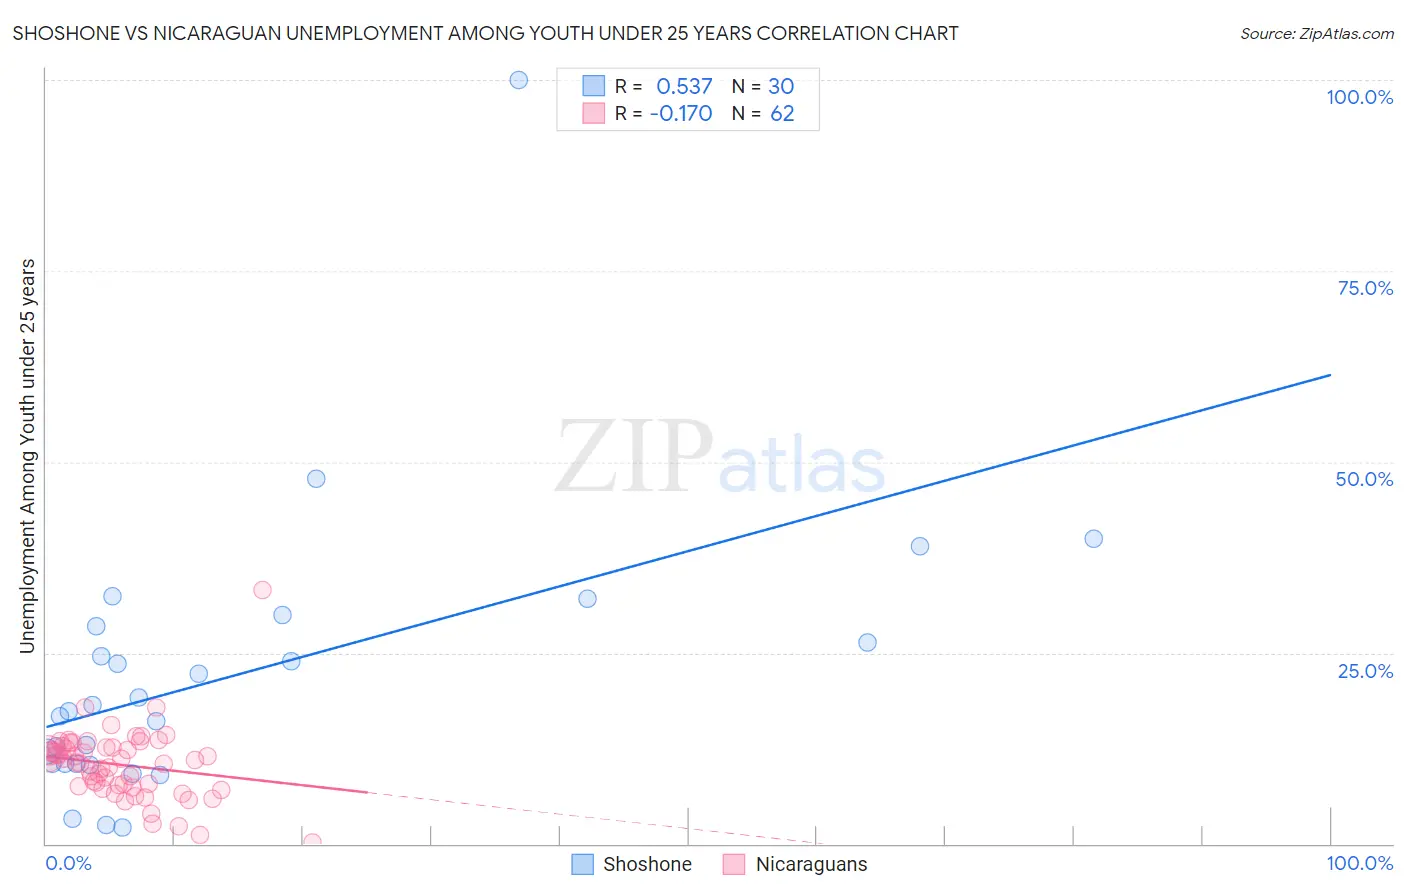 Shoshone vs Nicaraguan Unemployment Among Youth under 25 years